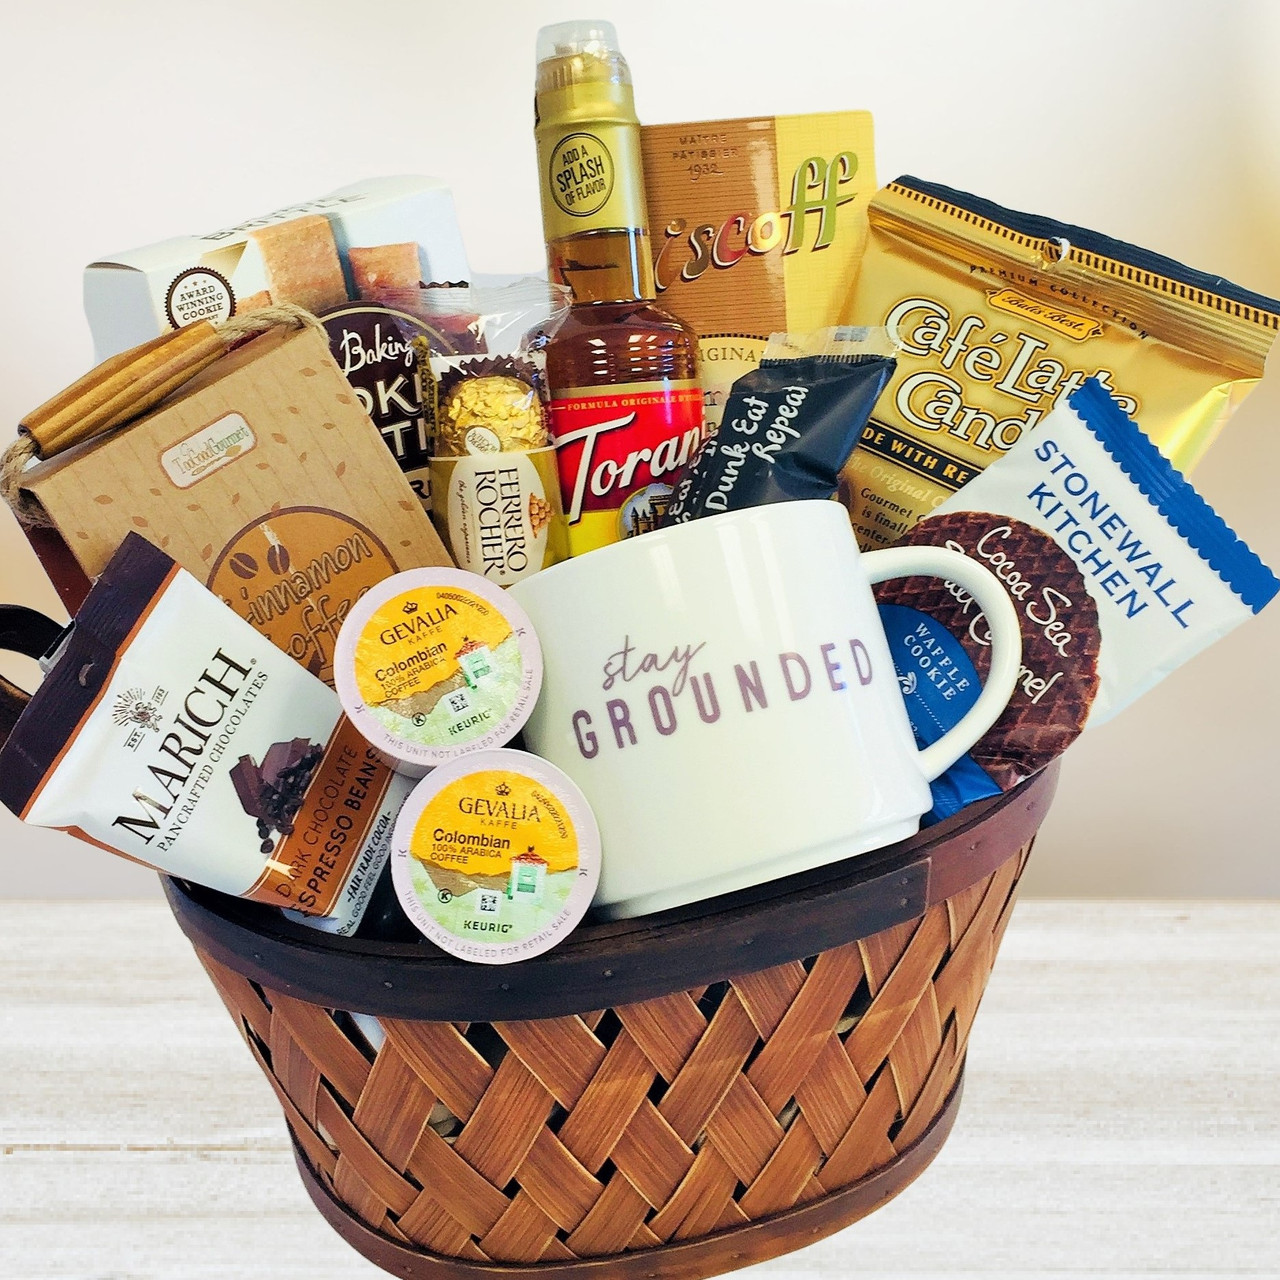 Gifts for Coffee Lovers  Coffee gift basket, Coffee gifts, Coffee